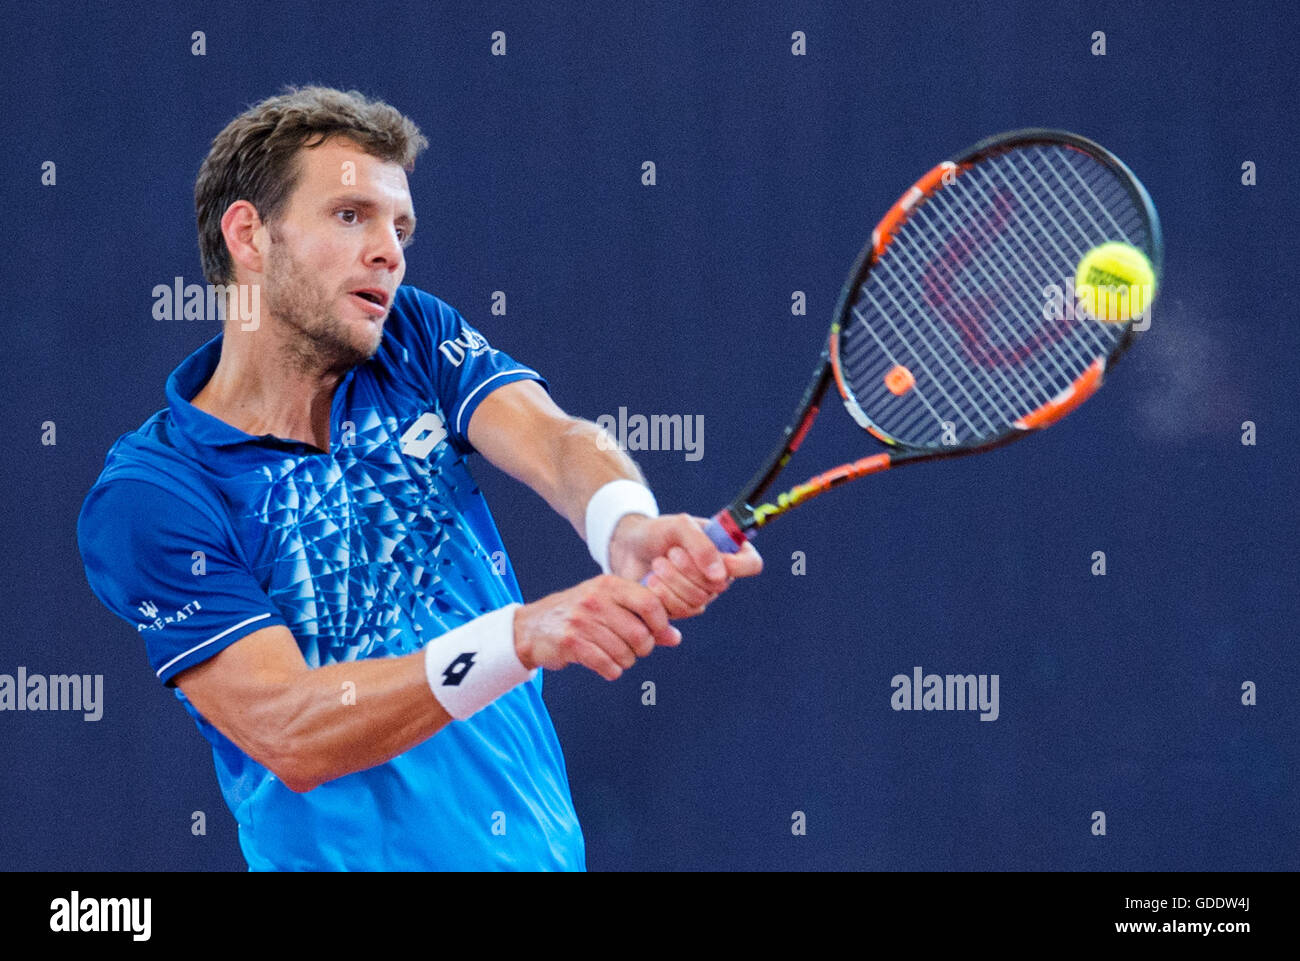 Hamburg, Germany. 15th July, 2016. France's Paul-Henri Mathieu in action against Pablo Cuevas of Uruguay during their quarter final match at the German Tennis Championships in Hamburg, Germany, 15 July 2016. Photo: DANIEL BOCKWOLDT/dpa/Alamy Live News Stock Photo